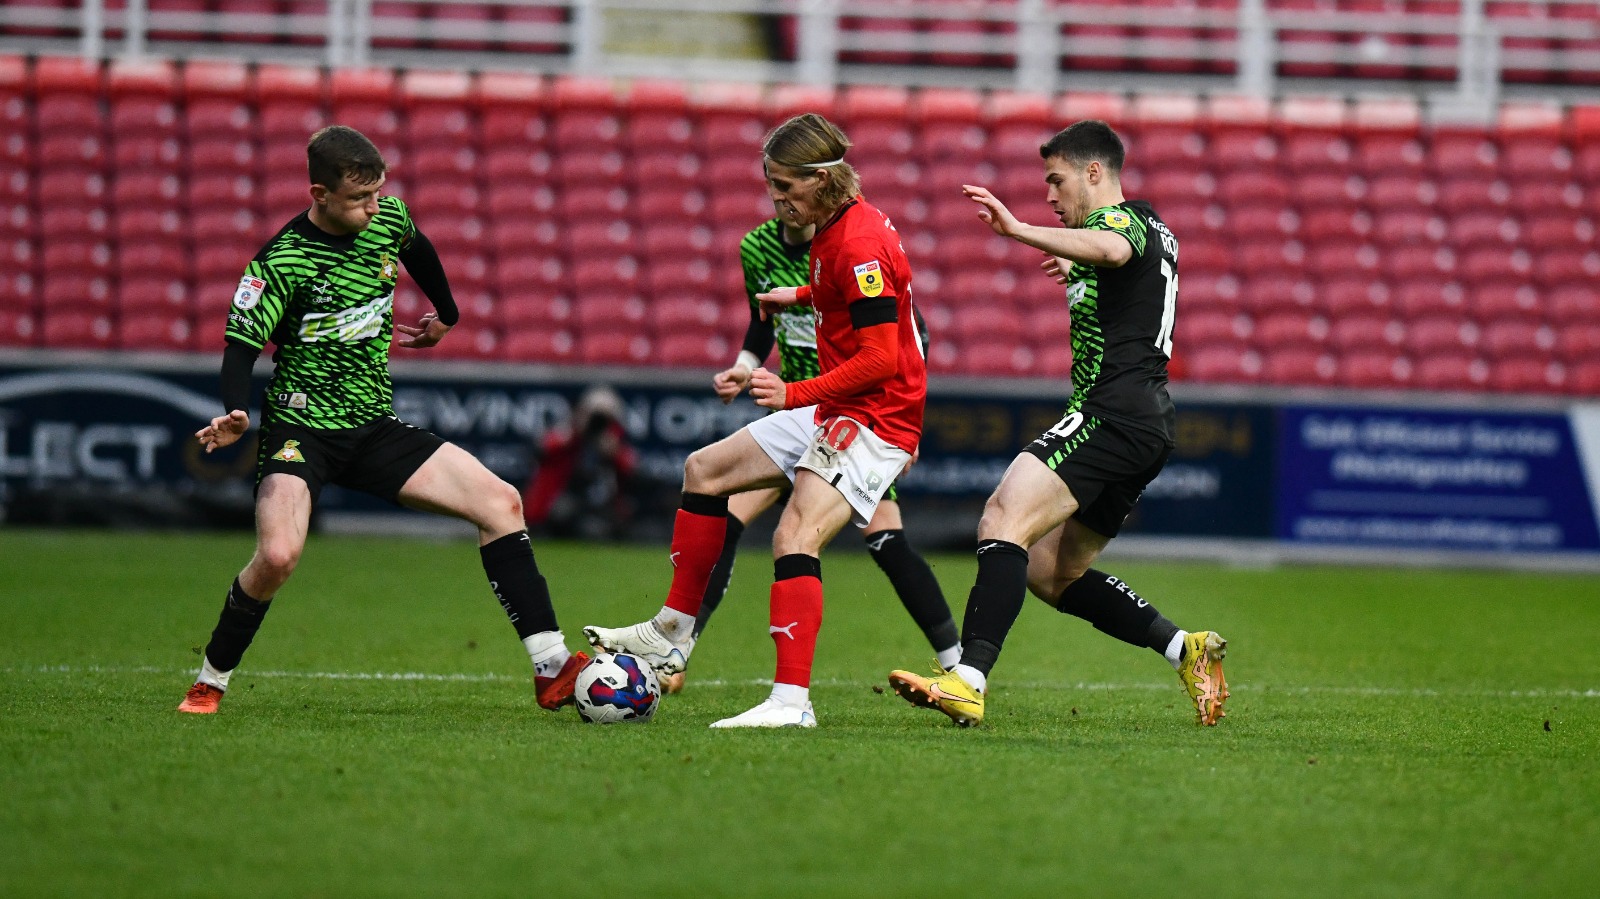 MATCH REPORT: Swindon (0) Doncaster Rovers (2)